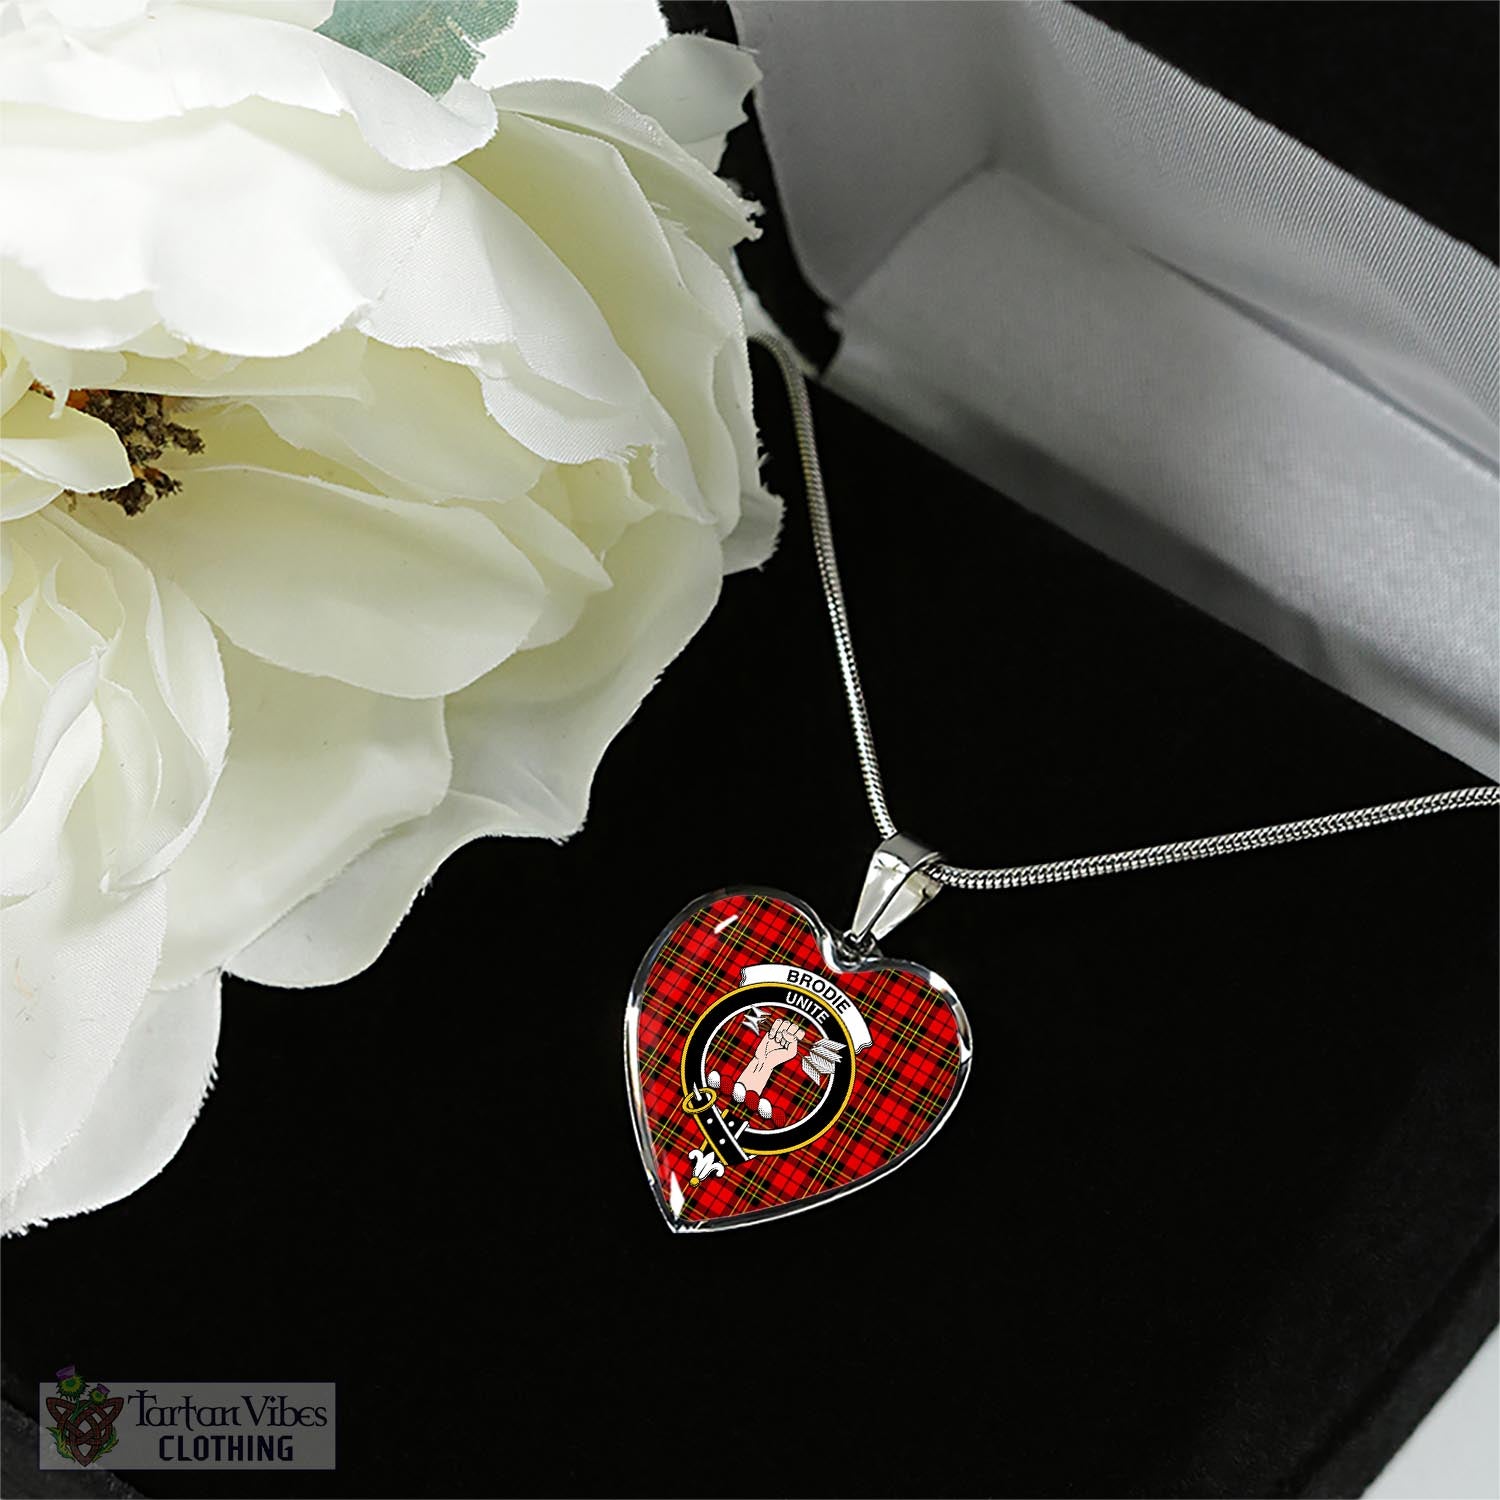 Tartan Vibes Clothing Brodie Modern Tartan Heart Necklace with Family Crest